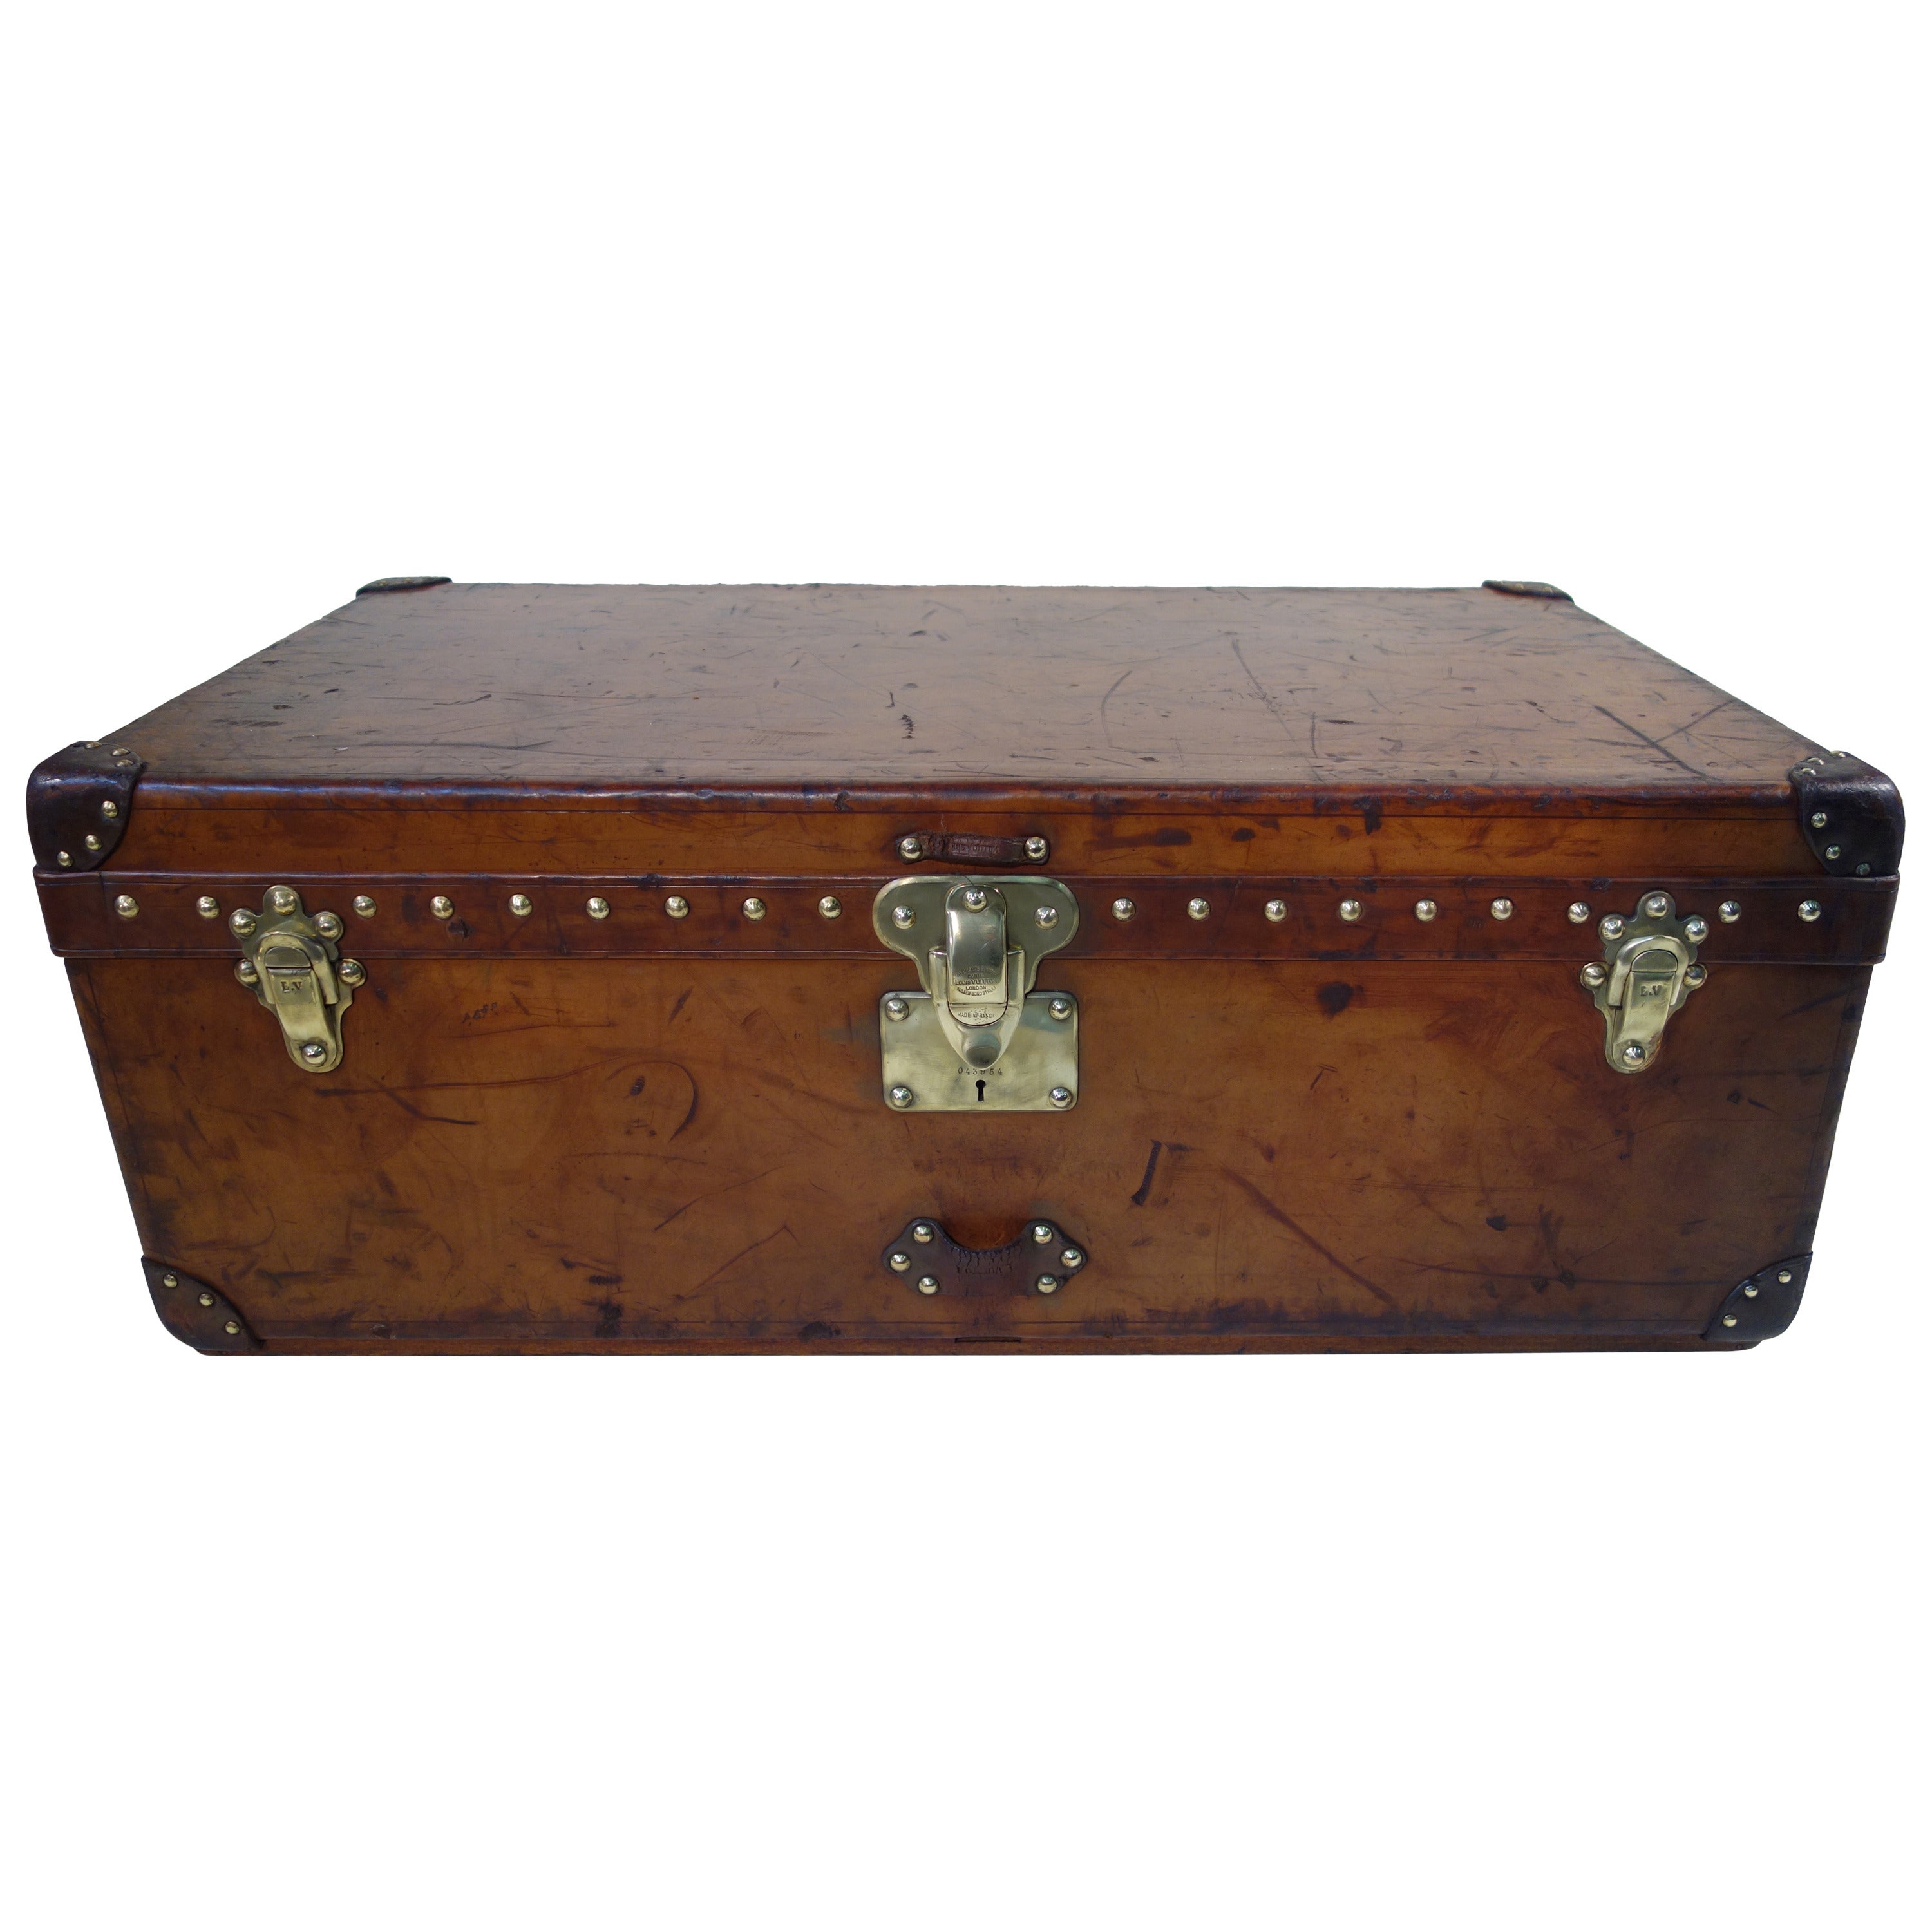 1900s Louis Vuitton Leather Cabin Trunk or Malle Cabine Cuir Vuitton